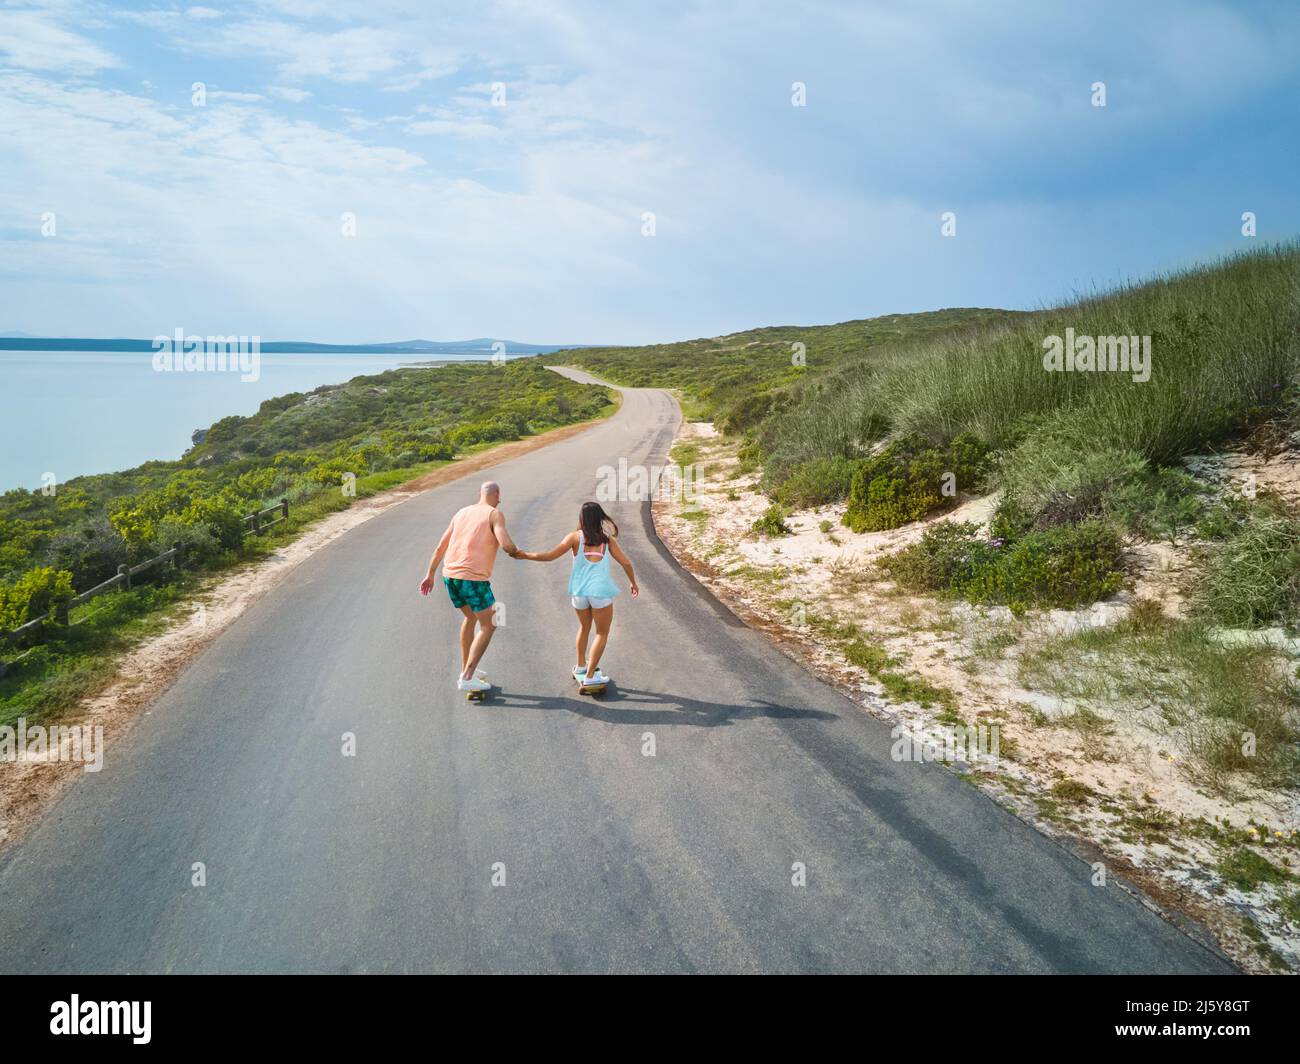 Couple holding hands and skateboarding on sunny ocean road Stock Photo